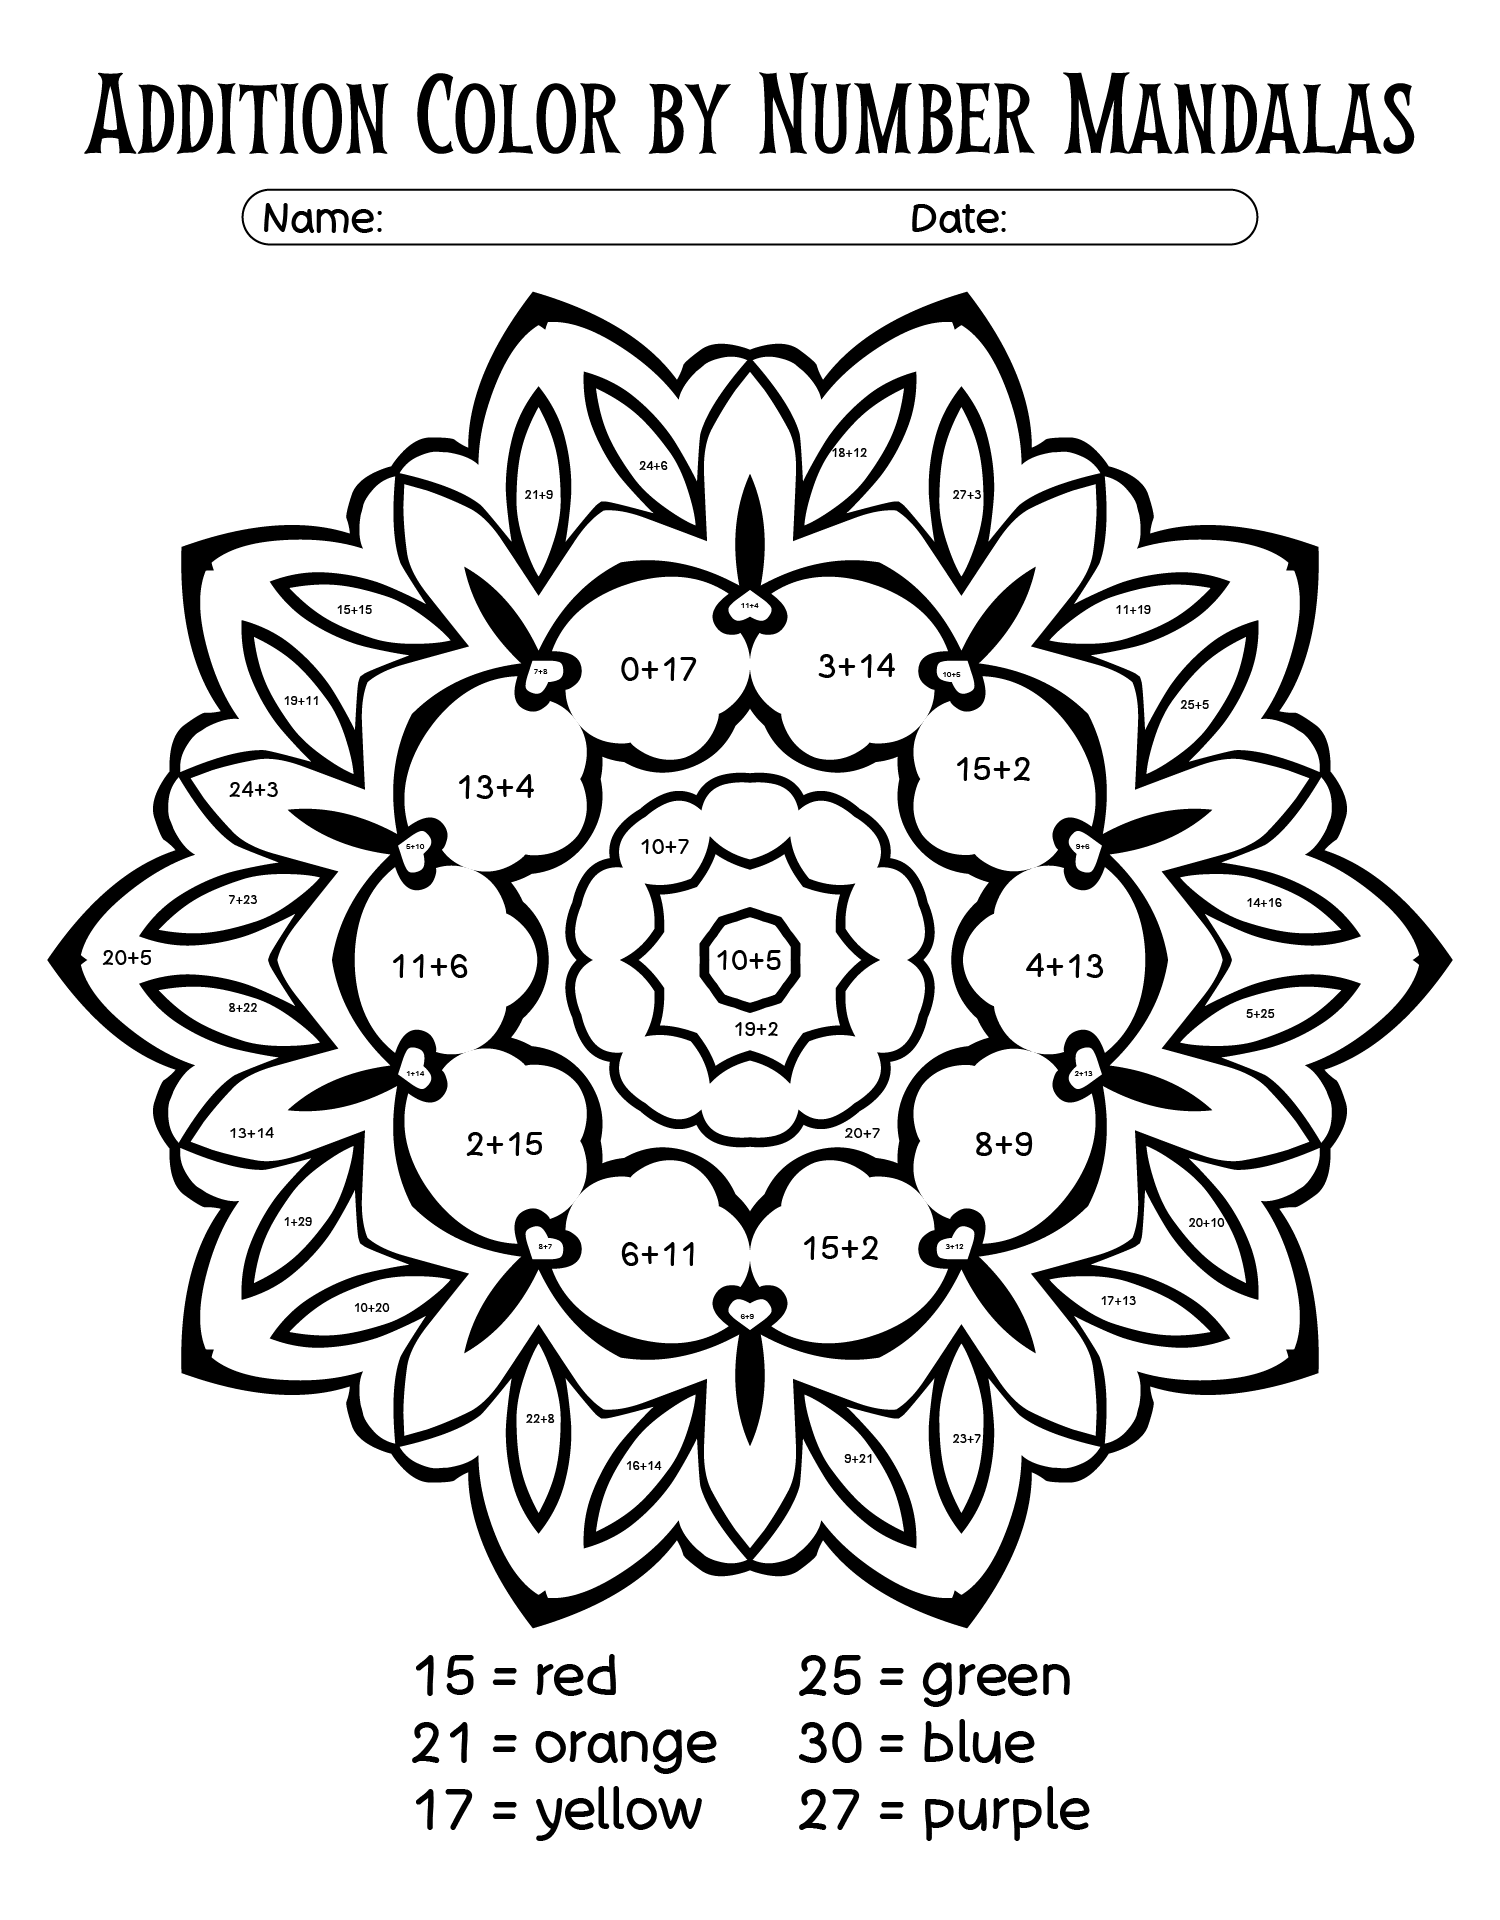 Printable Addition Color By Number Mandalas